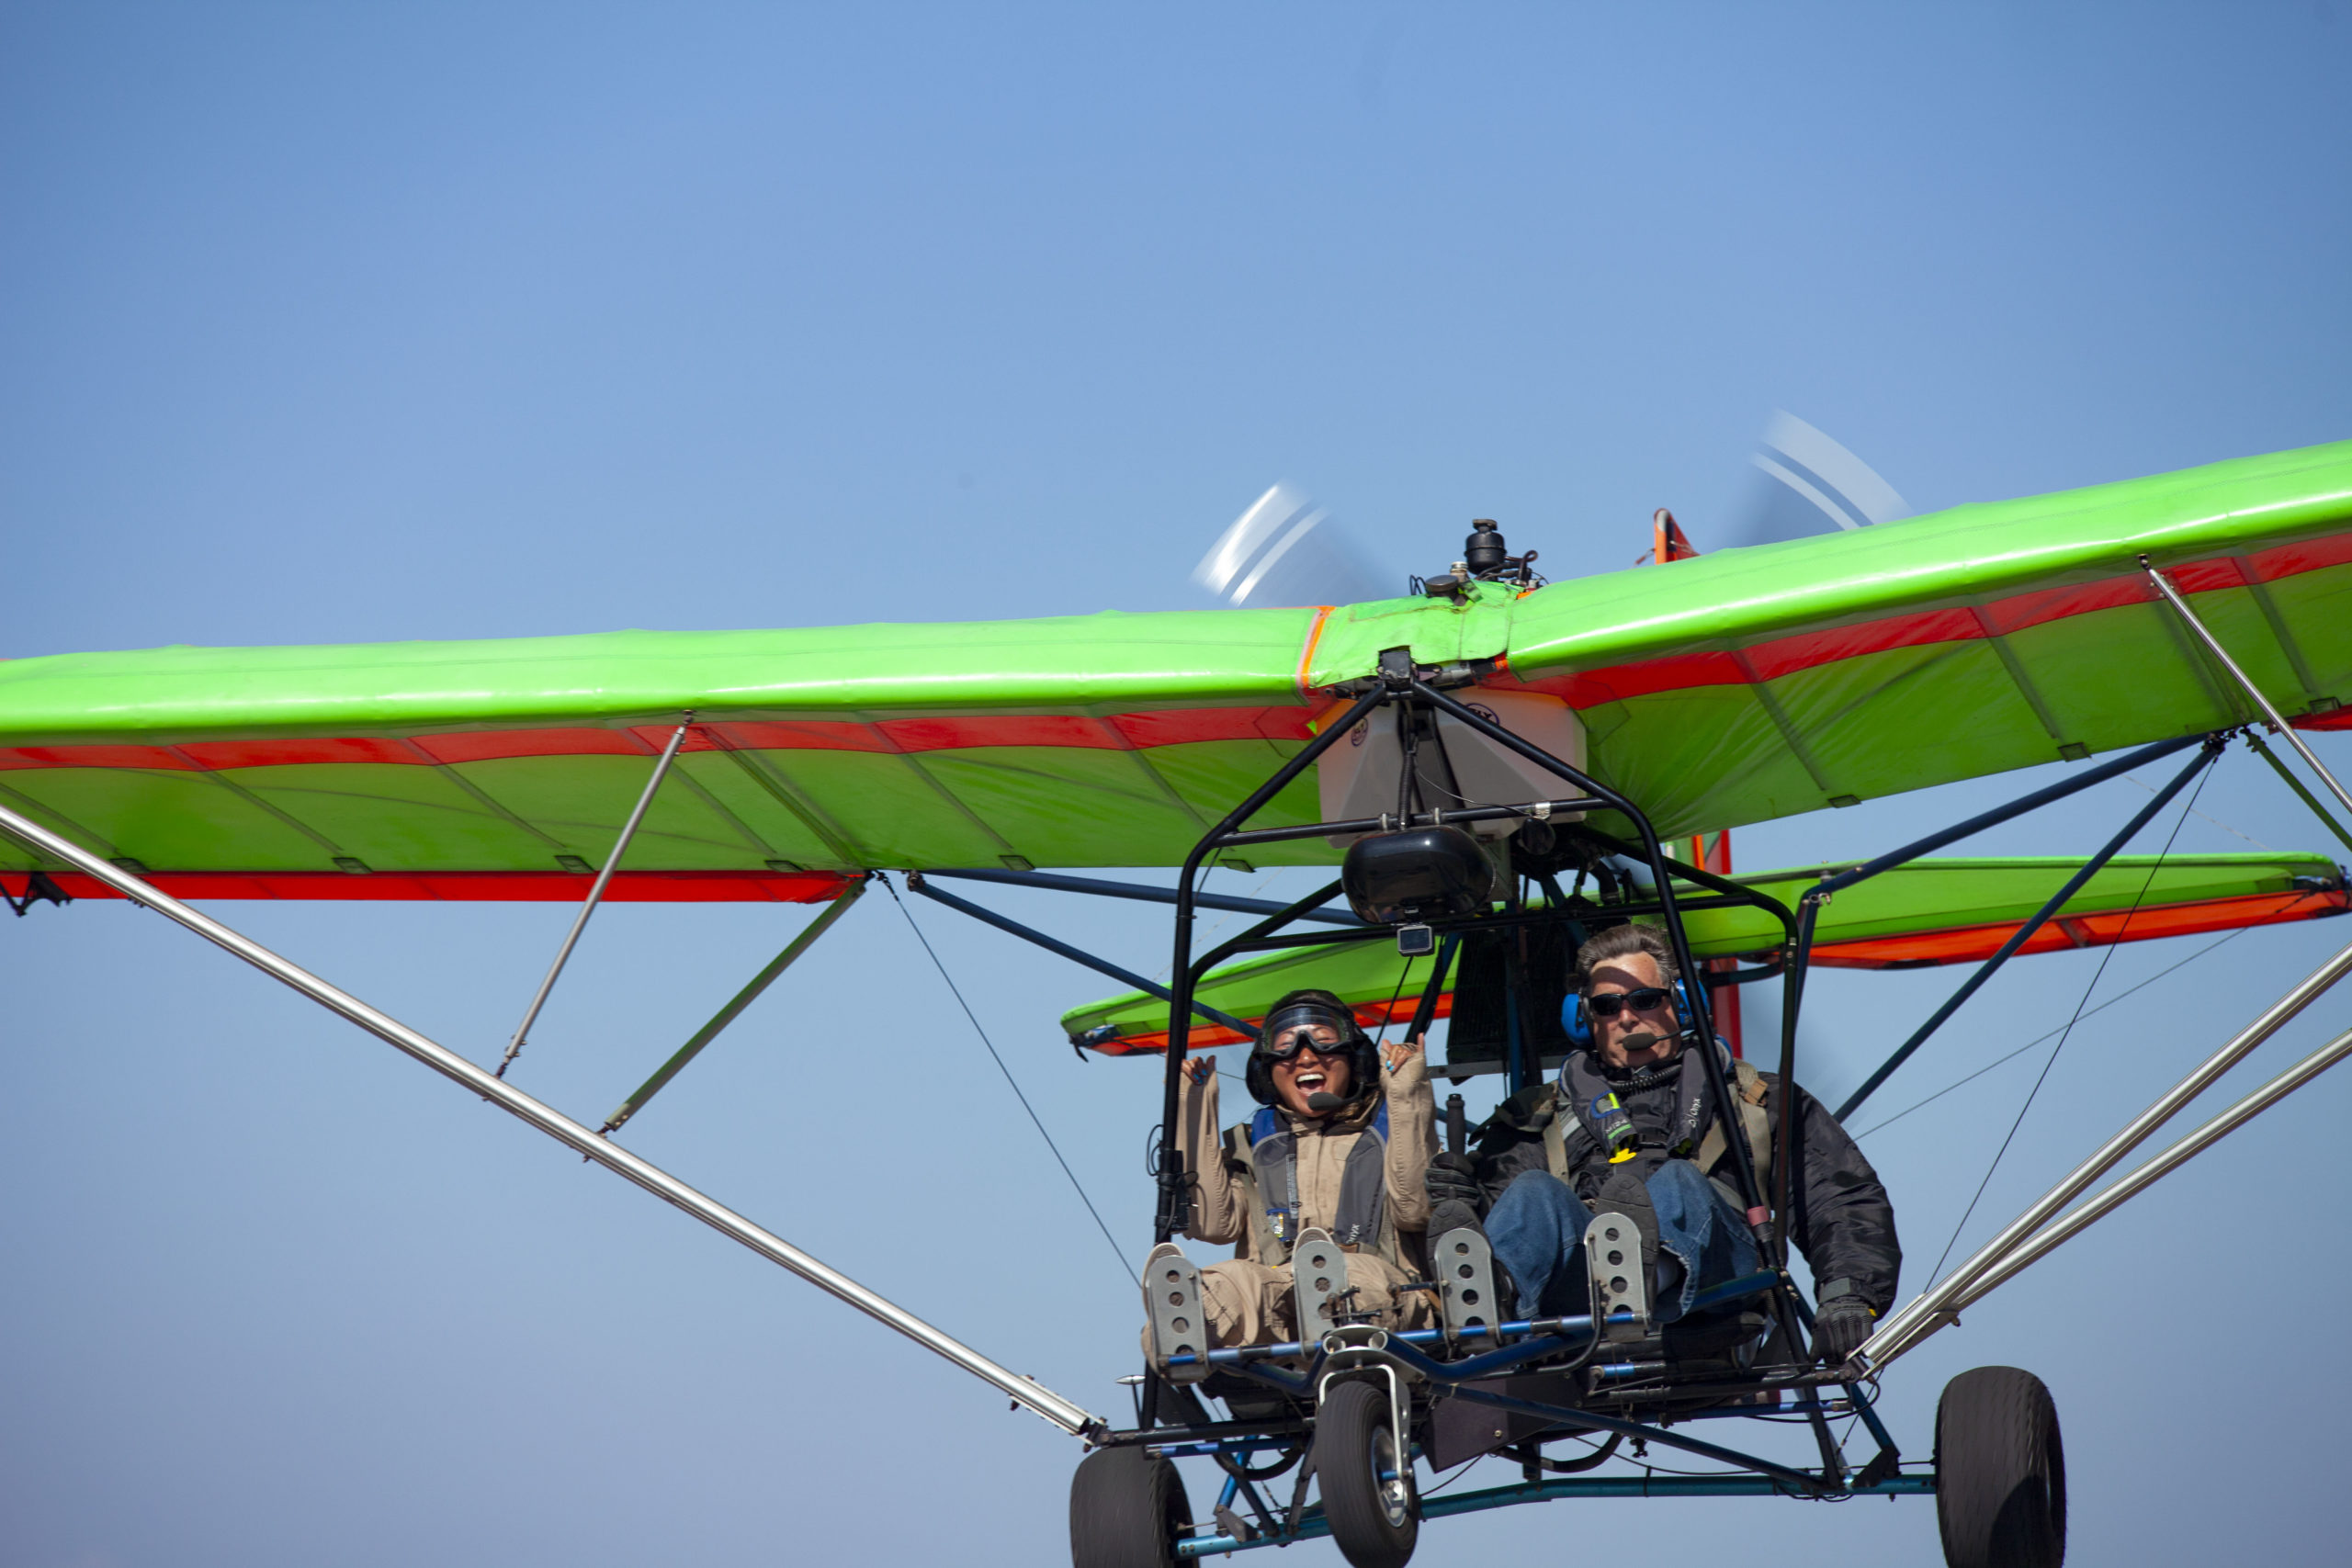 Get the thrill of a lifetime with Skyrider Ultralights - Visit